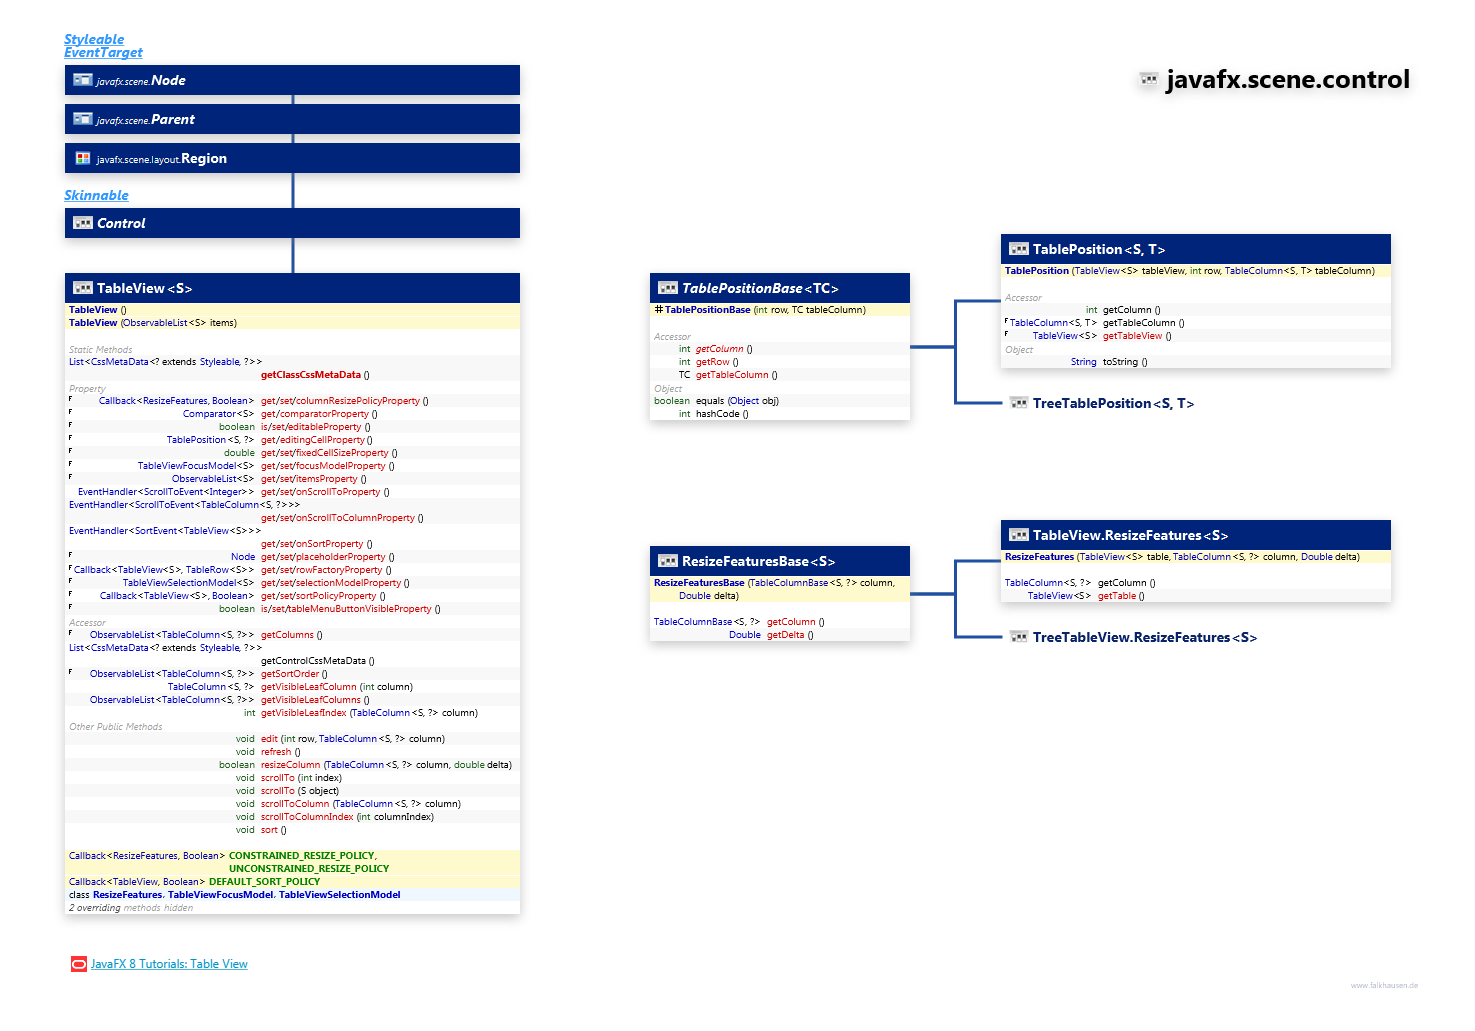 javafx.scene.control TableView class diagram and api documentation for JavaFX 8